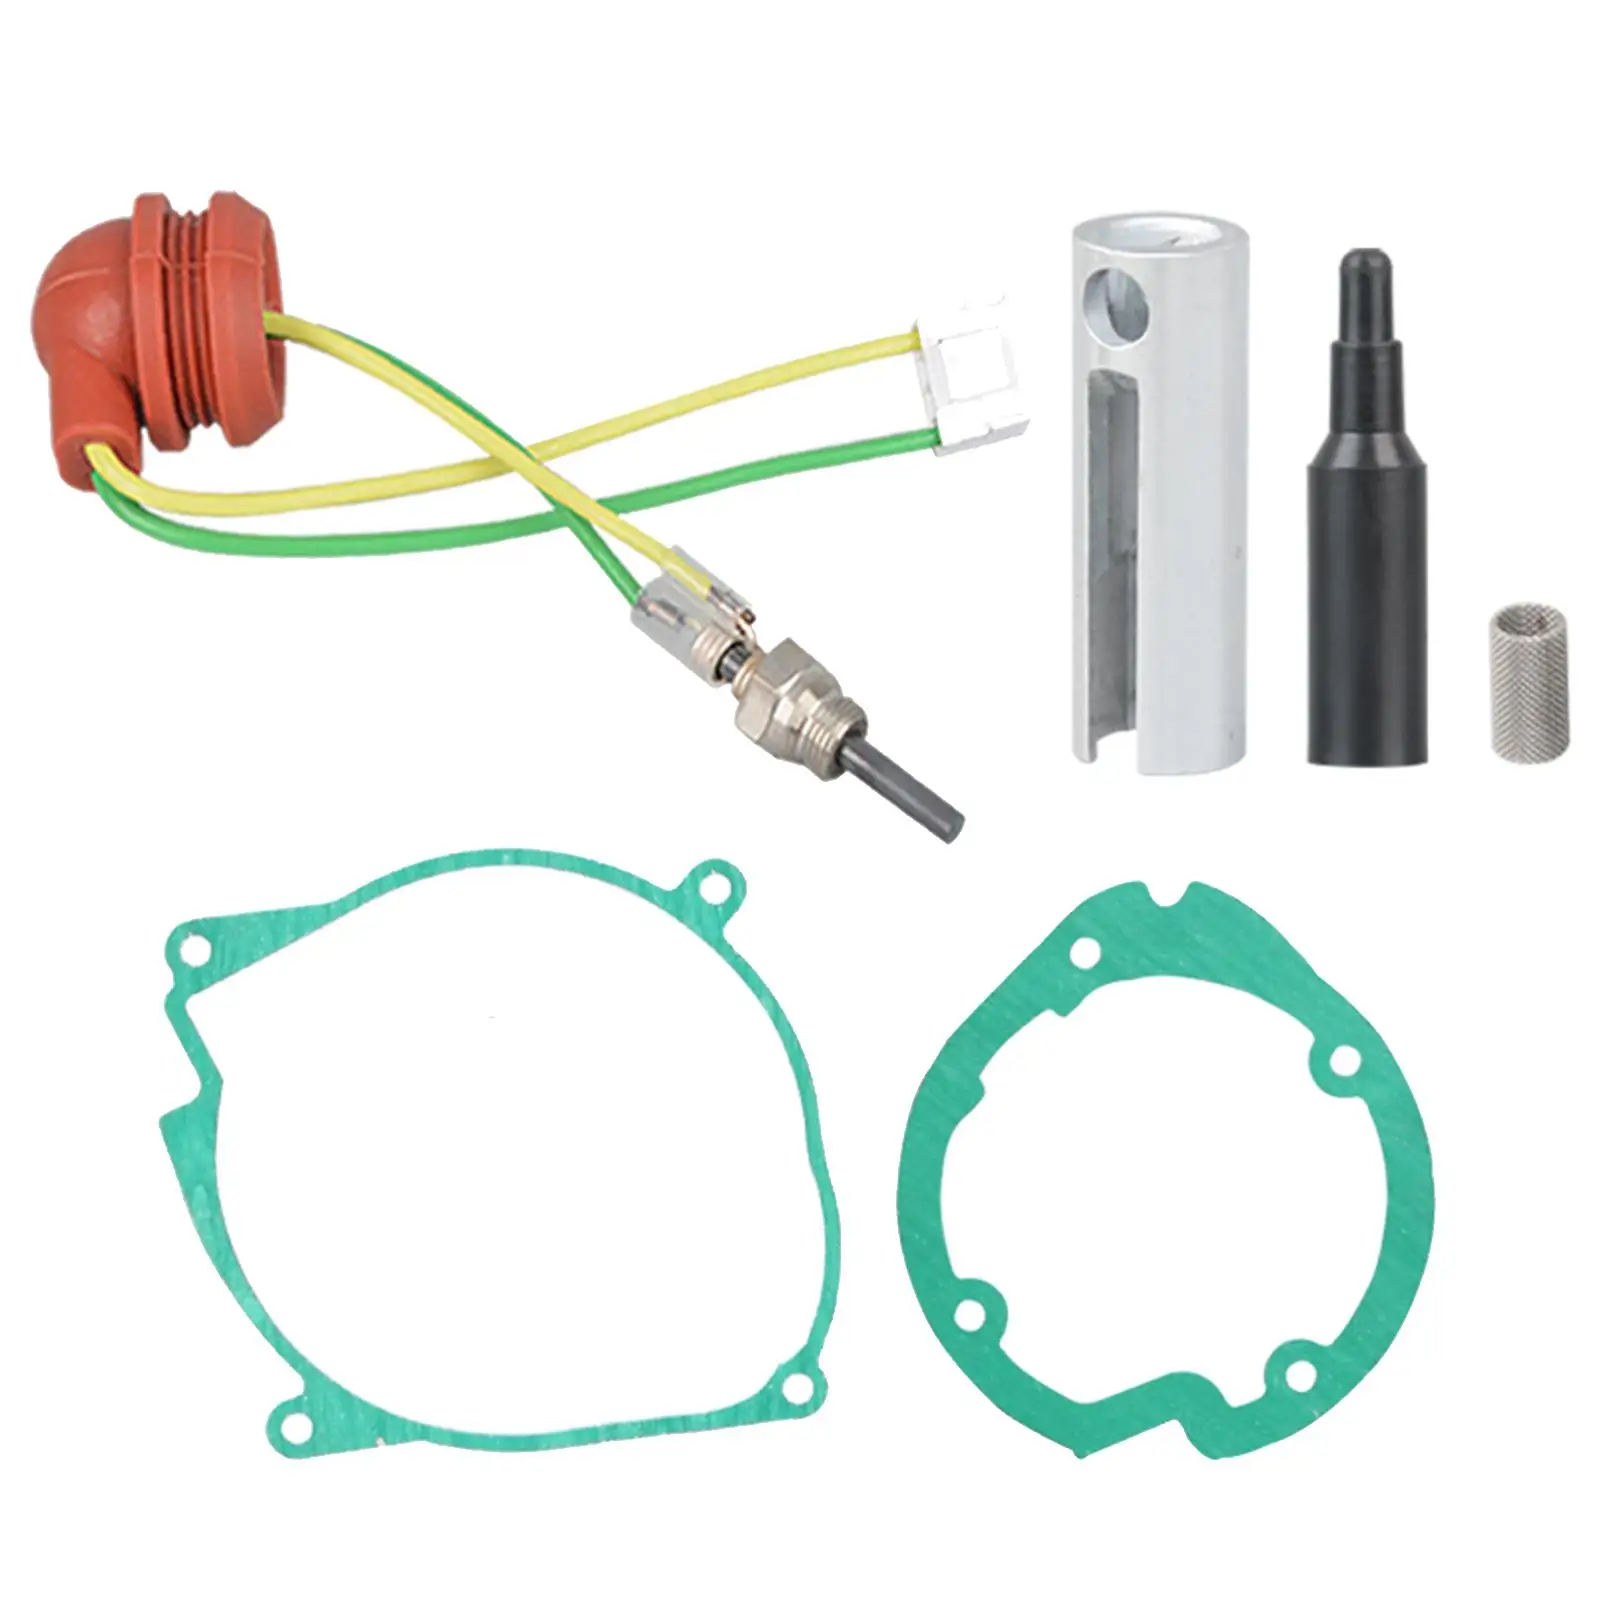 Glow Plug Repair Kit Accessory Parts Gasket for 12V 5kW Parking Heater